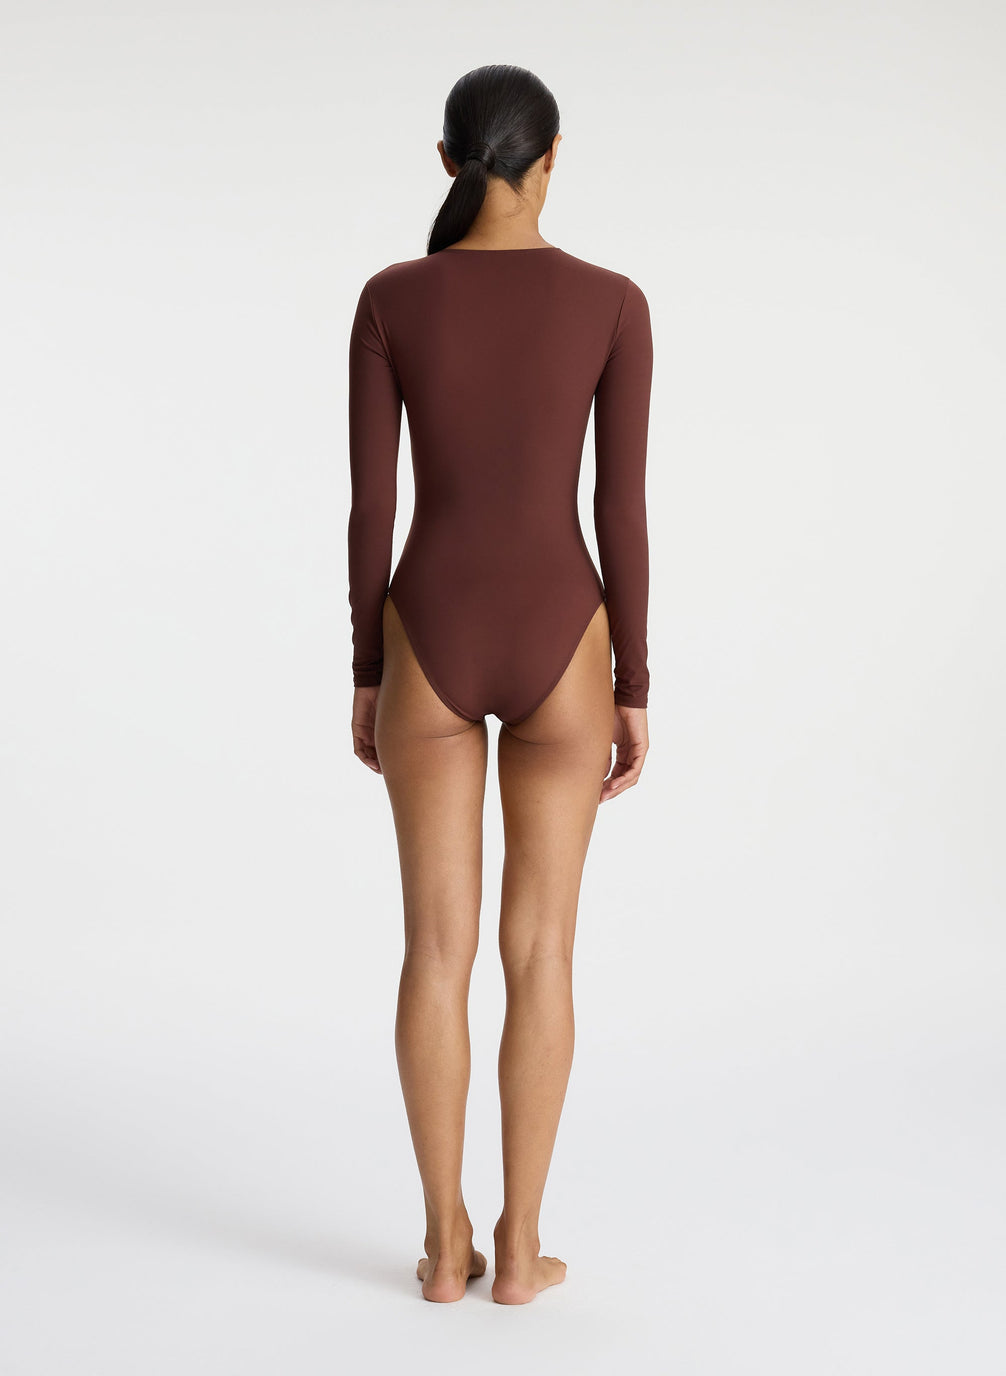 back view of woman wearing brown long sleeve zip front swimsuit